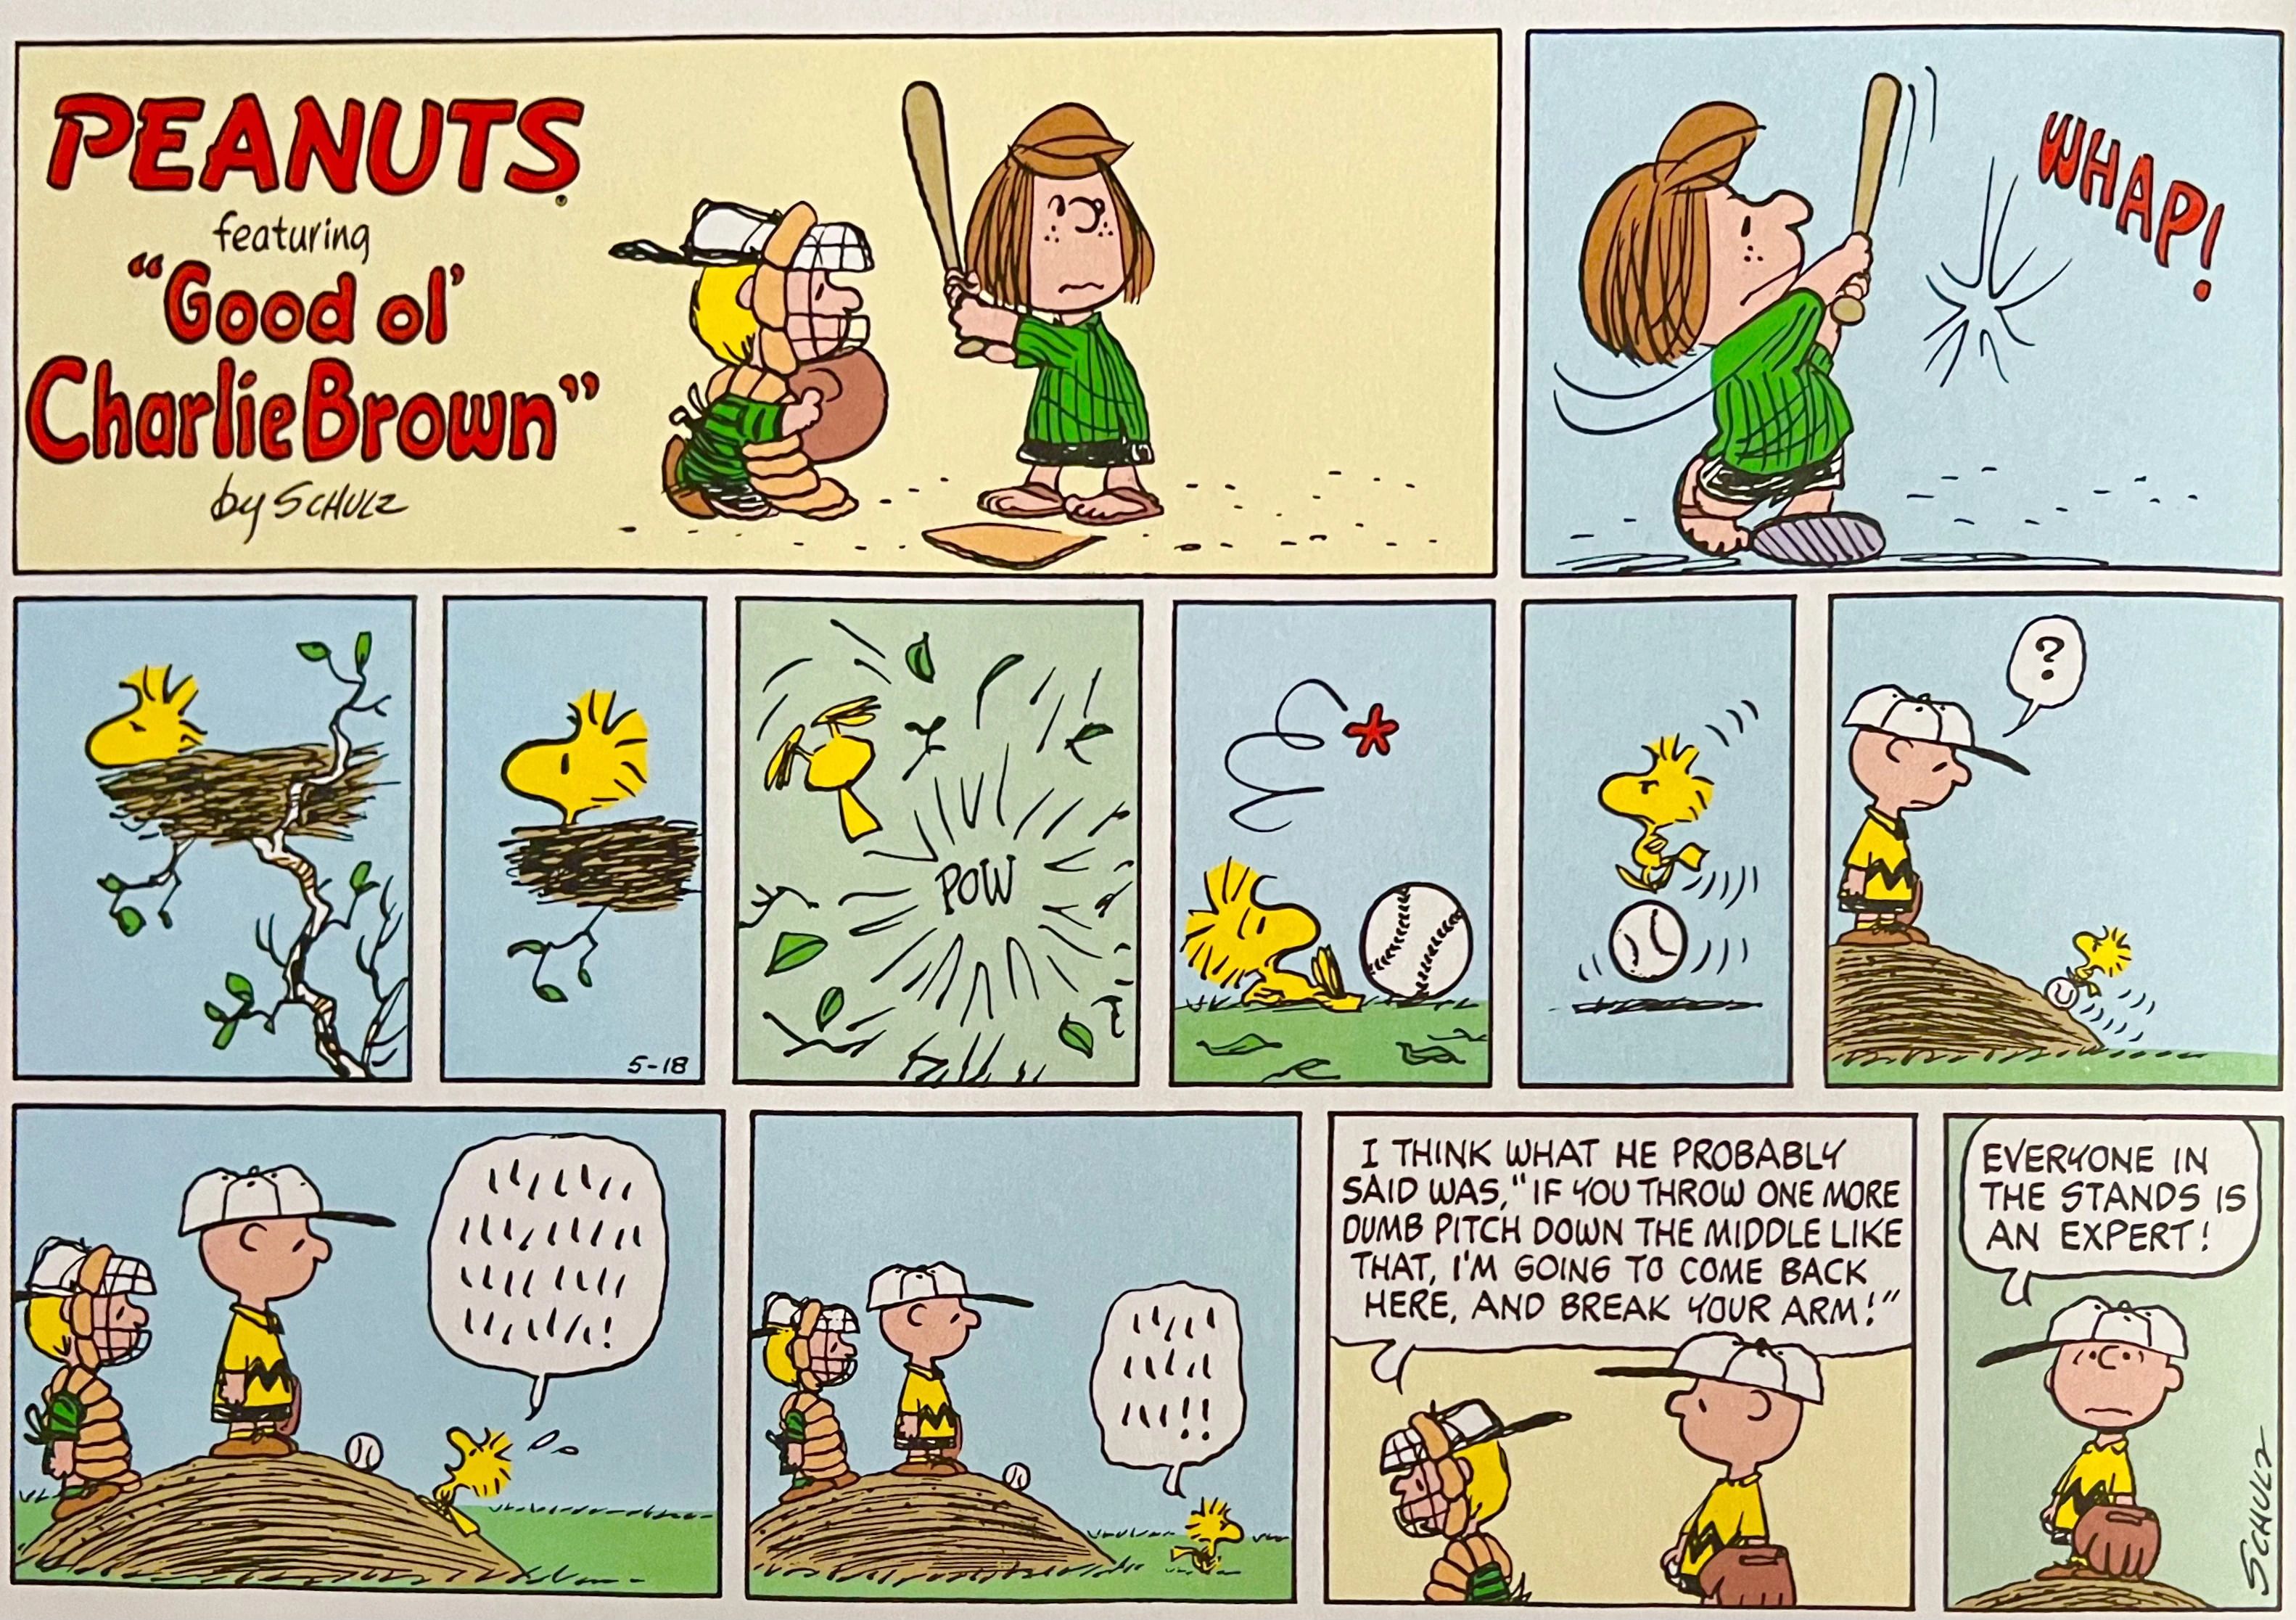 Peanuts baseball strip, Woodstock's nest is accidentally destroyed by a fly ball.